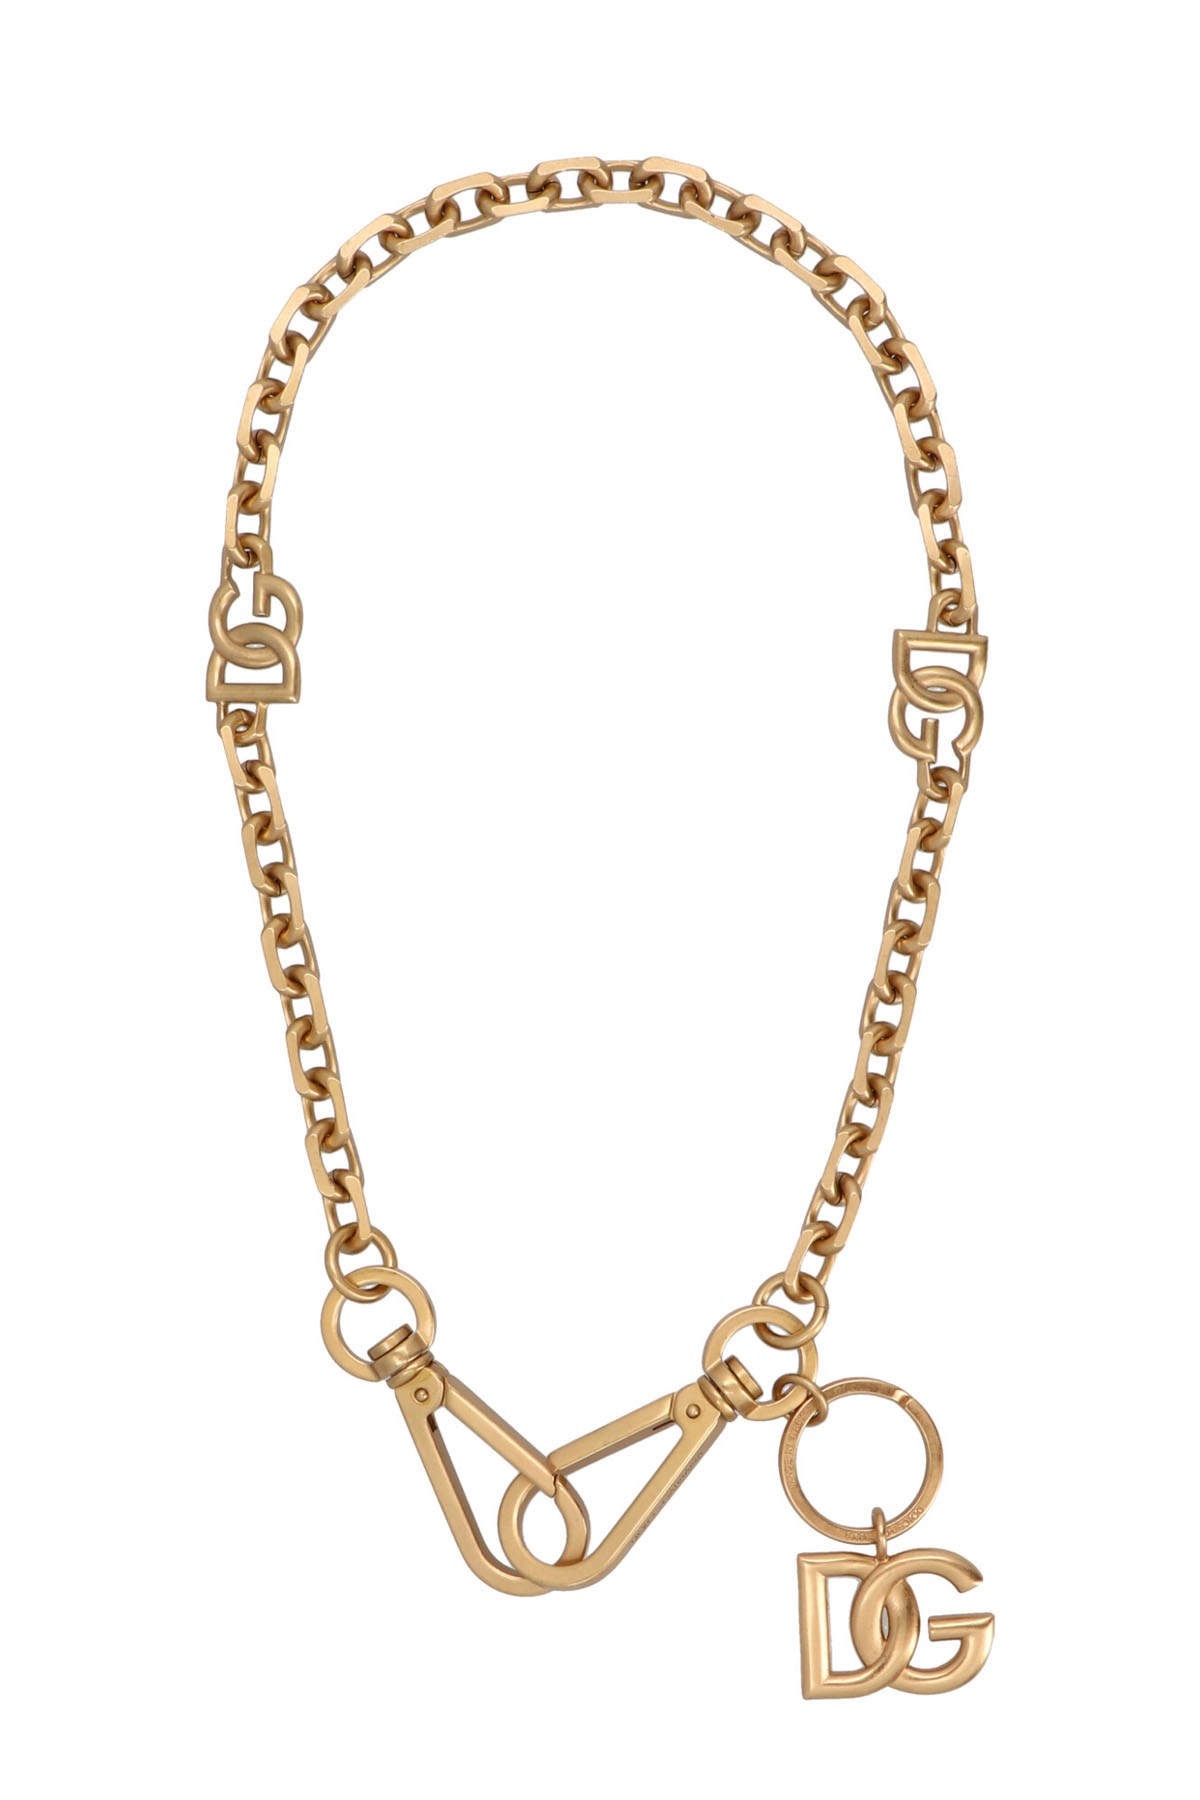 DOLCE & GABBANA Necklace Featuring A Double Snap Hook